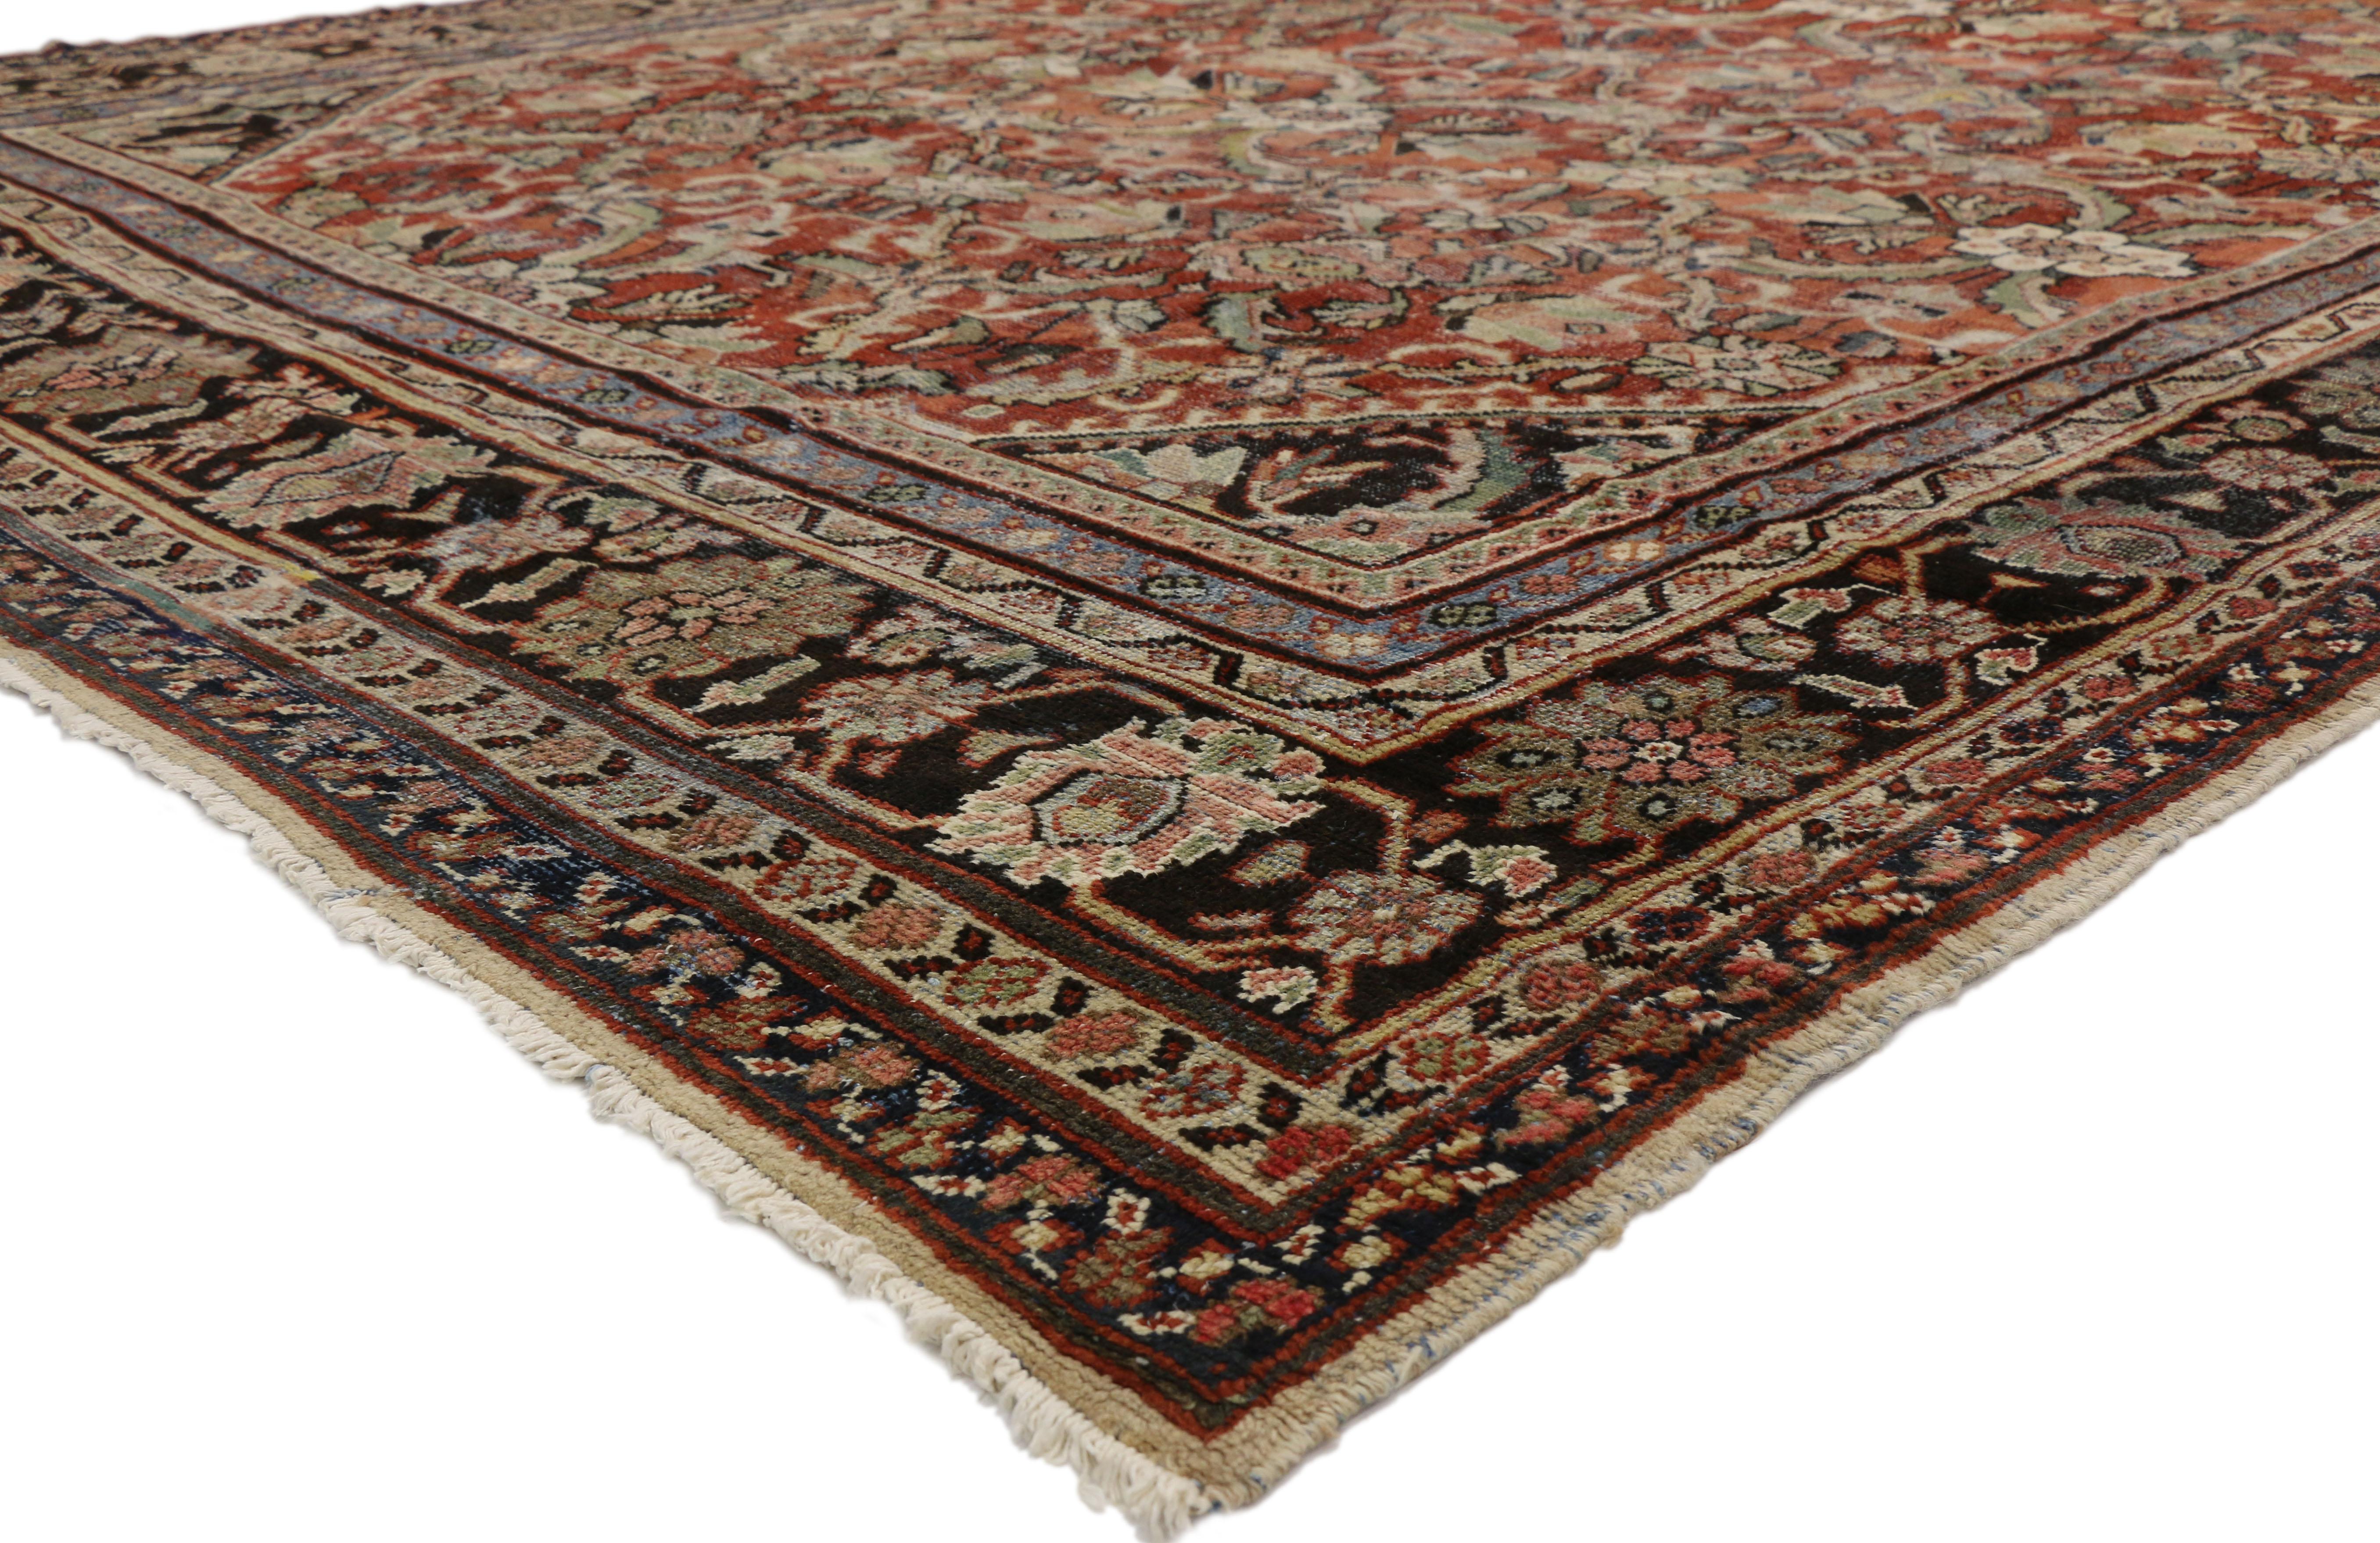 74415 Distressed Vintage Persian Mahal Rug, 10'08 X 14'01. Persian Mahal rugs, originating from the Mahallat region in central Northwestern Iran, are characterized by their bold geometric designs, large size, and handwoven construction using